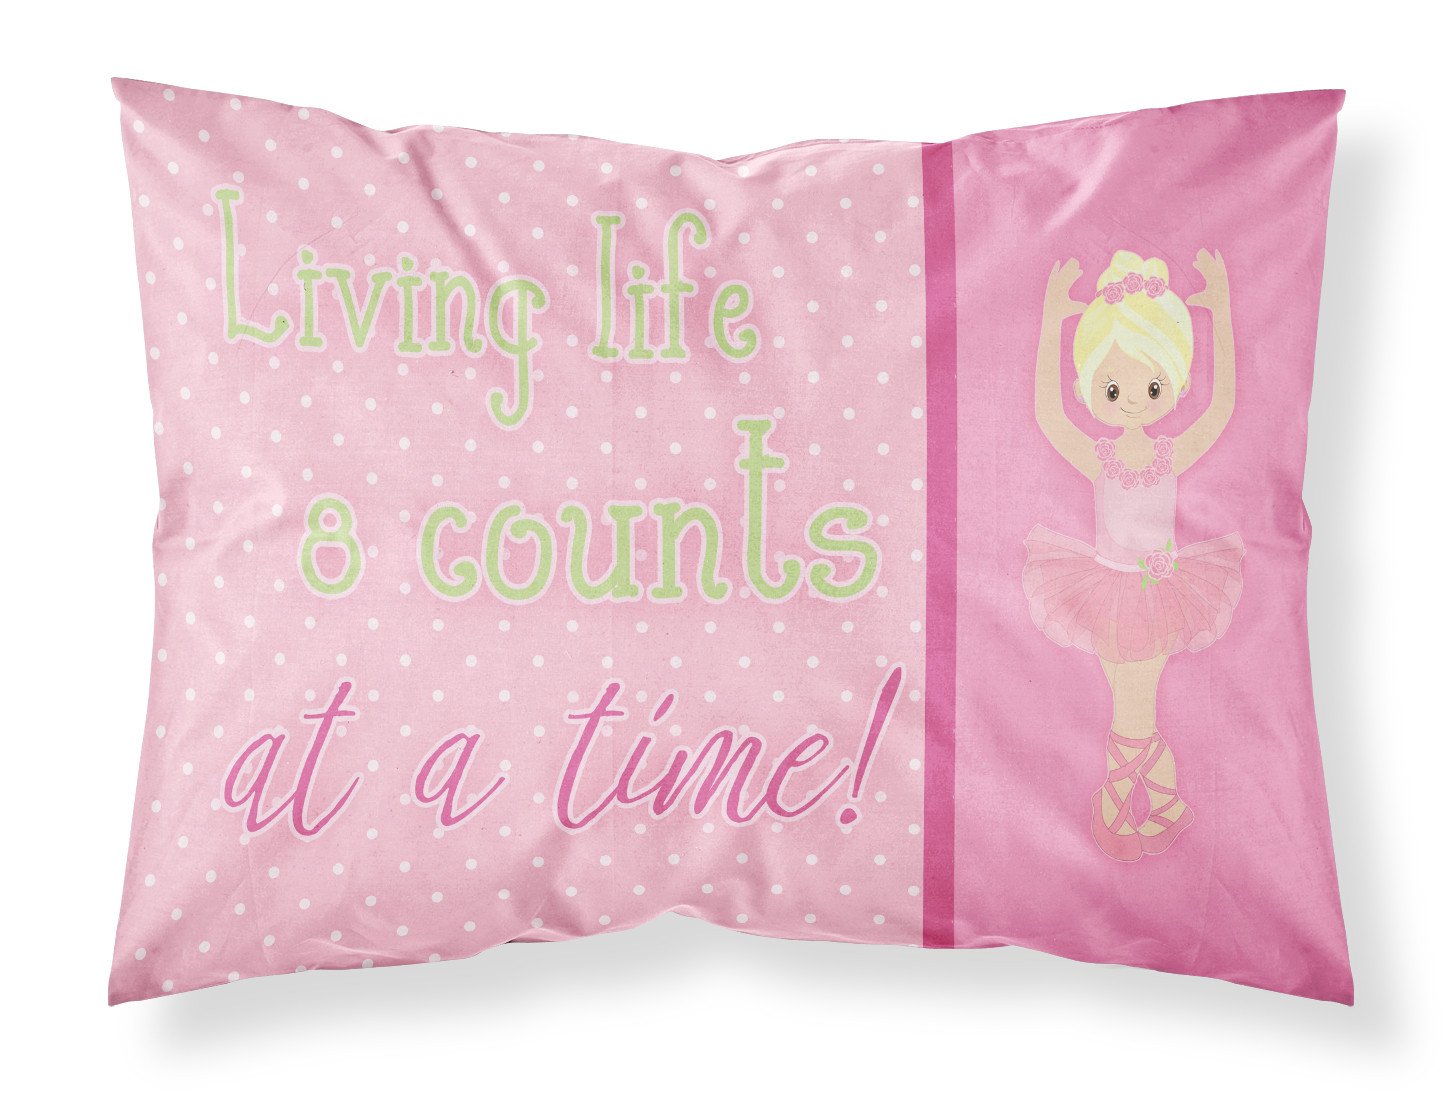 Ballet in 8 Counts Blonde Fabric Standard Pillowcase BB5397PILLOWCASE by Caroline's Treasures